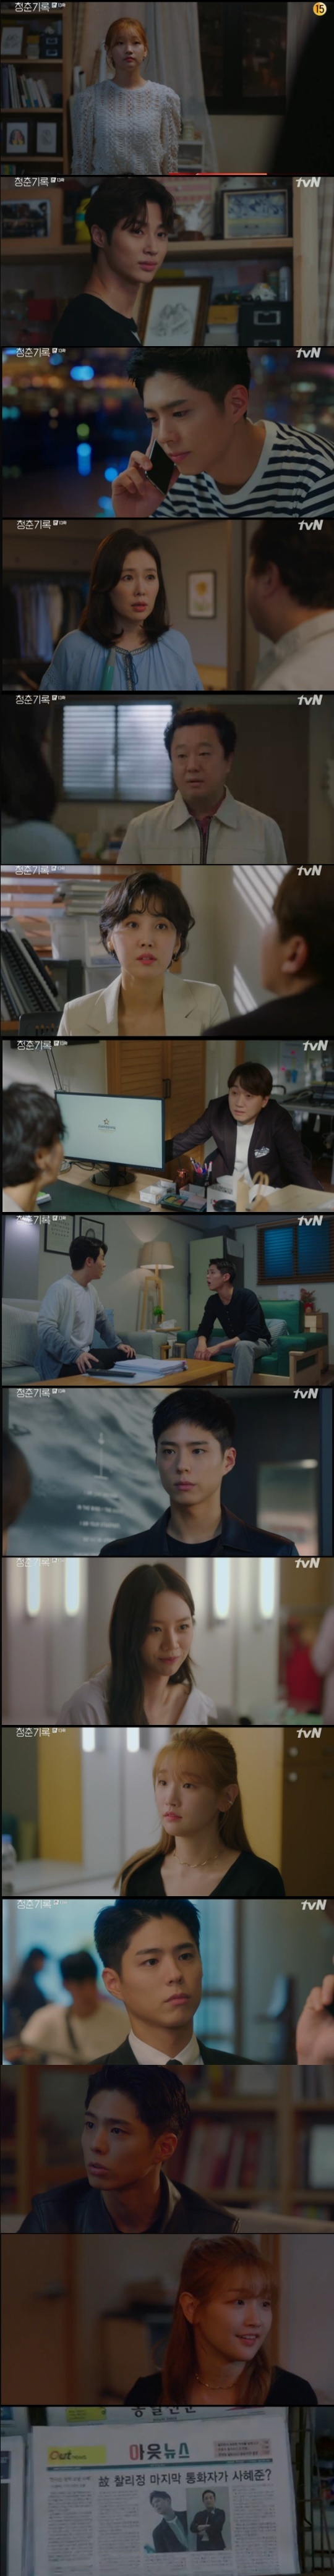 Park Bo-gums relationship with Park So-dam has also been shaken as he has been on a series of old-fashioned occasions.In the TVN Monday drama Record of Youth (director Ahn Gil-ho, playwright Ha Myung-hee) which was broadcast on October 19, Sa Hye-joon (Park Bo-gum) suffered another crisis as Charlie Jung (Lee Seung-jun) Scandal.Park So-dam, who was working at the shooting site and was leaving work, met Rain at the bus stop and called Sa Hye-joon, but Hye-joon was on the plane because of the shooting schedule.In the end, he made a decision on Won Hae-hyo (Byeon Woo-suk), and Hae-hyo took Jeong-ha home, and he said, Come in to Hae-hyo, who arrived at the house, creating a strange atmosphere.When Jeongha asked, Why are you so embarrassed? Wonhyo smiled a nice smile, saying, Yes.I was out of mental today, he said, and you called me when you were in trouble. So Hae-hyo said, Do you think I like you?Hes good at it because hes my girlfriend.At that time, a call came to Sa Hye-joon, and Hye-joon said, I want to see you, and I want to make a long call.I didnt tell him I was with you, Im afraid Im not feeling well, he said.Sa Hye-joon stopped by Jeong-has shop the next day, saying that she was sorry for her romance with top star Jean (Lee Sung-kyung), and decided, I believe what you showed me.Do not be hard with that. Hye-joon said, I want to see you. Lets eat together. Real? Why?I was delighted, and Sa Hye-joon smiled, saying, Why? Because my son loves me. Han Ae-sook (Ha Hee-ra) told Lingnan (Park Soo-young) that Lets not live on Hye-joon, lets make our own money. So Lingnan said, Of course.Why did people buy the house without moving, and theyre making money because its being rebuilt in the future, and they keep telling me that Hye-joon wants to be good to you, so I wont tell you at all, Ae-suk said.Lingnan asked Qiao Zhenyus father to work, so Qiao Zhenyu told him not to work in the future but to lean on him.I never helped her work, said Lingnan, who left her out? And then Lingnan said, I dont have a stake in her appearance.Lee visited Lee Min-jae (Shin Dong-mi) and told her that she had a picture of Sa Hye-joon on the paparazzi, and that Lee Min-jae asked, Are they reporting? Lee Tae-soo said, I stopped it.Hye-joon will let me go, he said. I would like to do a lot of things together. Do you know that the city hall is a famous place? When Lee Min-jae said that his one-year contract was about to end, Lee Tae-soo sarcastically said, Do you think you will continue working with me? I do not know? Lee Min-jae said, I will not contract with you.Han Ae-sook told Sa Hye-joon, who had come home for a long time, Im sorry. Hye-joon said, My mother said she was sorry when I saw me these days. My life changed as two women came into my life.Im a little qualified, said Ae Sook, and you saw her do it to Haehyo, and I didnt even have half of her.Hye-joon said, Im sorry I can not meet Zhao and Zhazu. Ae-suk said, Did your mother tell you she would buy you rice? Lets set a date.Sa Hye-joon went to Lee Tae-soo and asked, Did you forget everything you did to me? Lee Tae-soo said, How do you forget.I will do well in the future, sa Hye-joon laughed, You are a pro at this level. So, Sa Hye-joon said, I can not stand touching my family.Did you give my brother a gift certificate? Lee said, I did not receive it.Earlier, Sa Kyung-joon refused the gift certificate that Lee Tae-soo came to him and said, I was more strict about this because I was fraudulent.Sa Kyung-joon was sued after posting a comment on the malicious comment on Hye-joons article.It was just a mirroring comment as he wrote, said Sa Kyung-joon, who met with the lawyer in charge of the case, Jung Ji-ah (Sul In-ah), and insisted that he would not post an apology.As soon as I saw Jeongha, I said, I passed, and asked her to meet him because I wanted to tell her about her passing while watching her face.I believe in someone who is credited by my brother Hae-hyo, said Ahn Jeong-ha, who showed her YouTube video, I want to be chosen for my skills.I am a sister, he said, and immediately called Hae-hyo to thank him for saying, You are a benefactor of my life. Then Hye-joon heard the two people and felt sorry.Sa Hye-joon visited the house of Ahn Jeong-ha for a while before shooting the advertisement, and while he was glad to see Sa Hye-joon, Lee Min-jae recalled the words You and Hye-joon will fly Scandal.Do not come home in the future, what if I and Scandal are you doing? I am worried about my ex-girlfriend, top star Jean, is I the third star of the episode?Sa Hye-joon said that he should have a public relationship, but he asked, What do I do when I break up with you? Sa Hye-joon said, Are we breaking up?I have never been in touch with you, and I have come to you because I have been busy, he said.Im doing my best on a murderous schedule, he said. But Im doing my best. I need to make it easier to see for a while.You should show a bright look at it for a while. Sa Hye-joon apologized, Im sorry. Are you happy now? You got everything you wanted.Hes bigger than you thought. Hye-joon didnt answer.